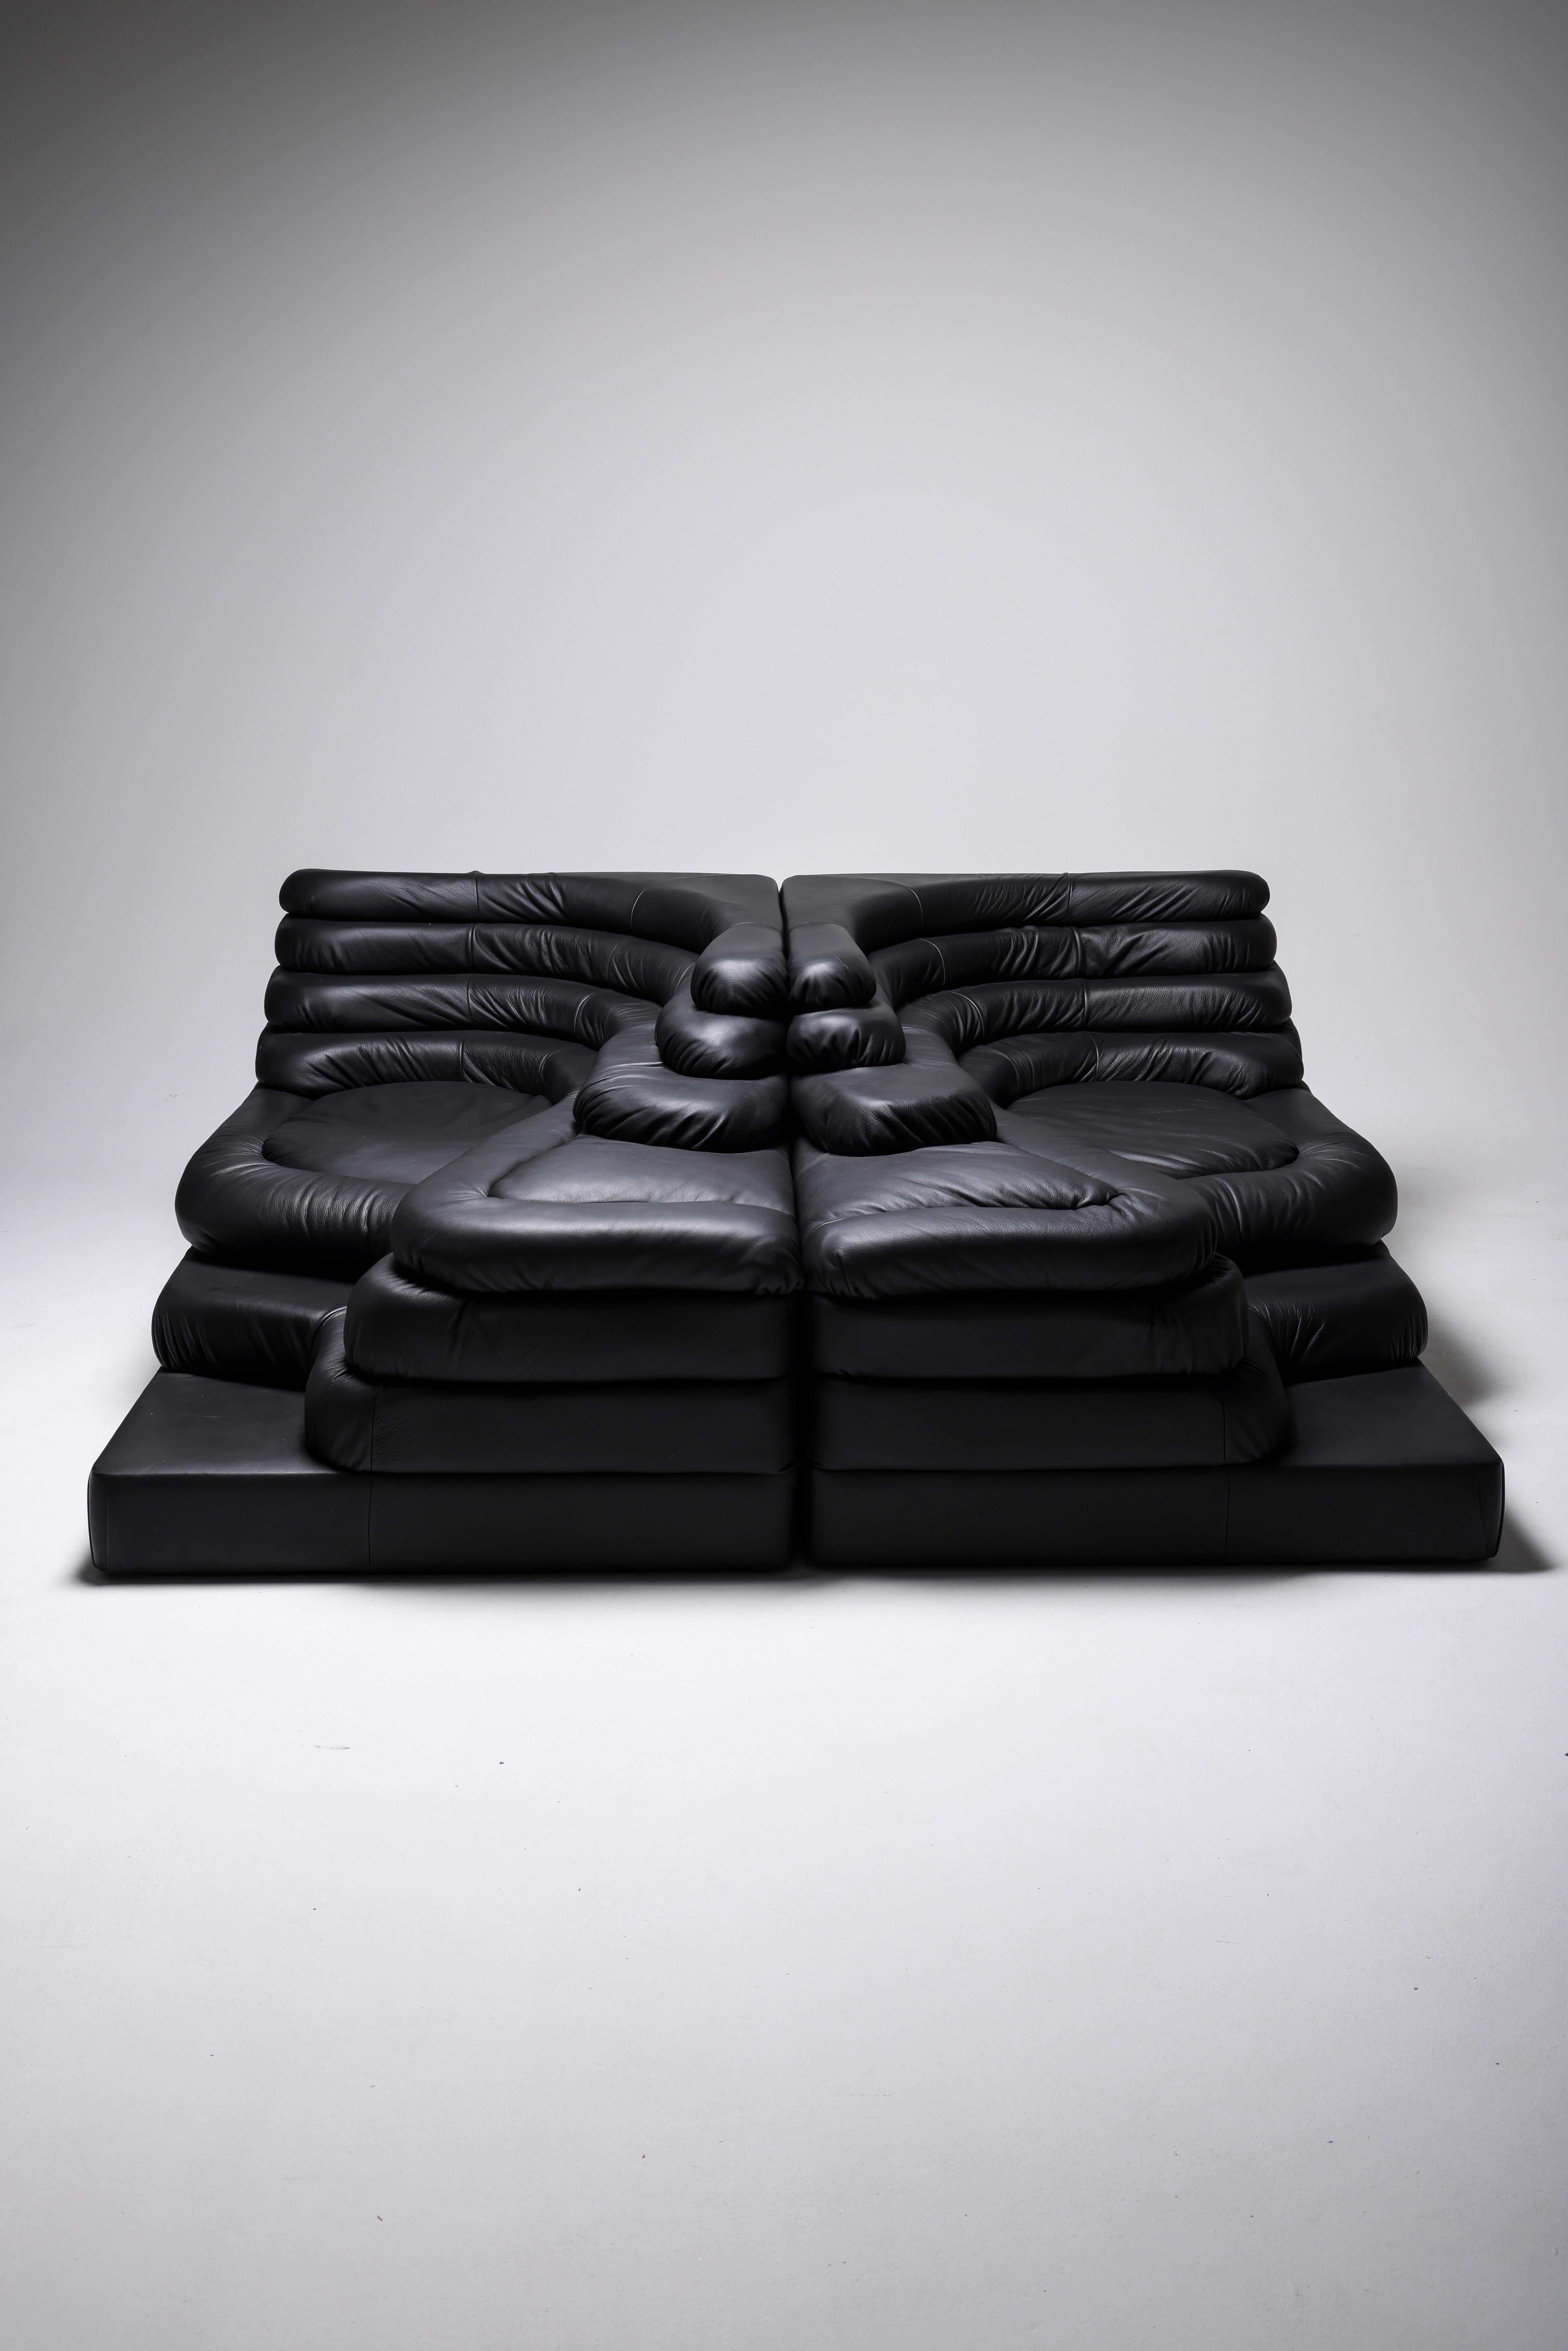 Pair of black sofa model Terrazza or DS 1025 designed by Ubald Klug in fully reupholstered leather. Structure in wood and felt under the base. Very good condition.